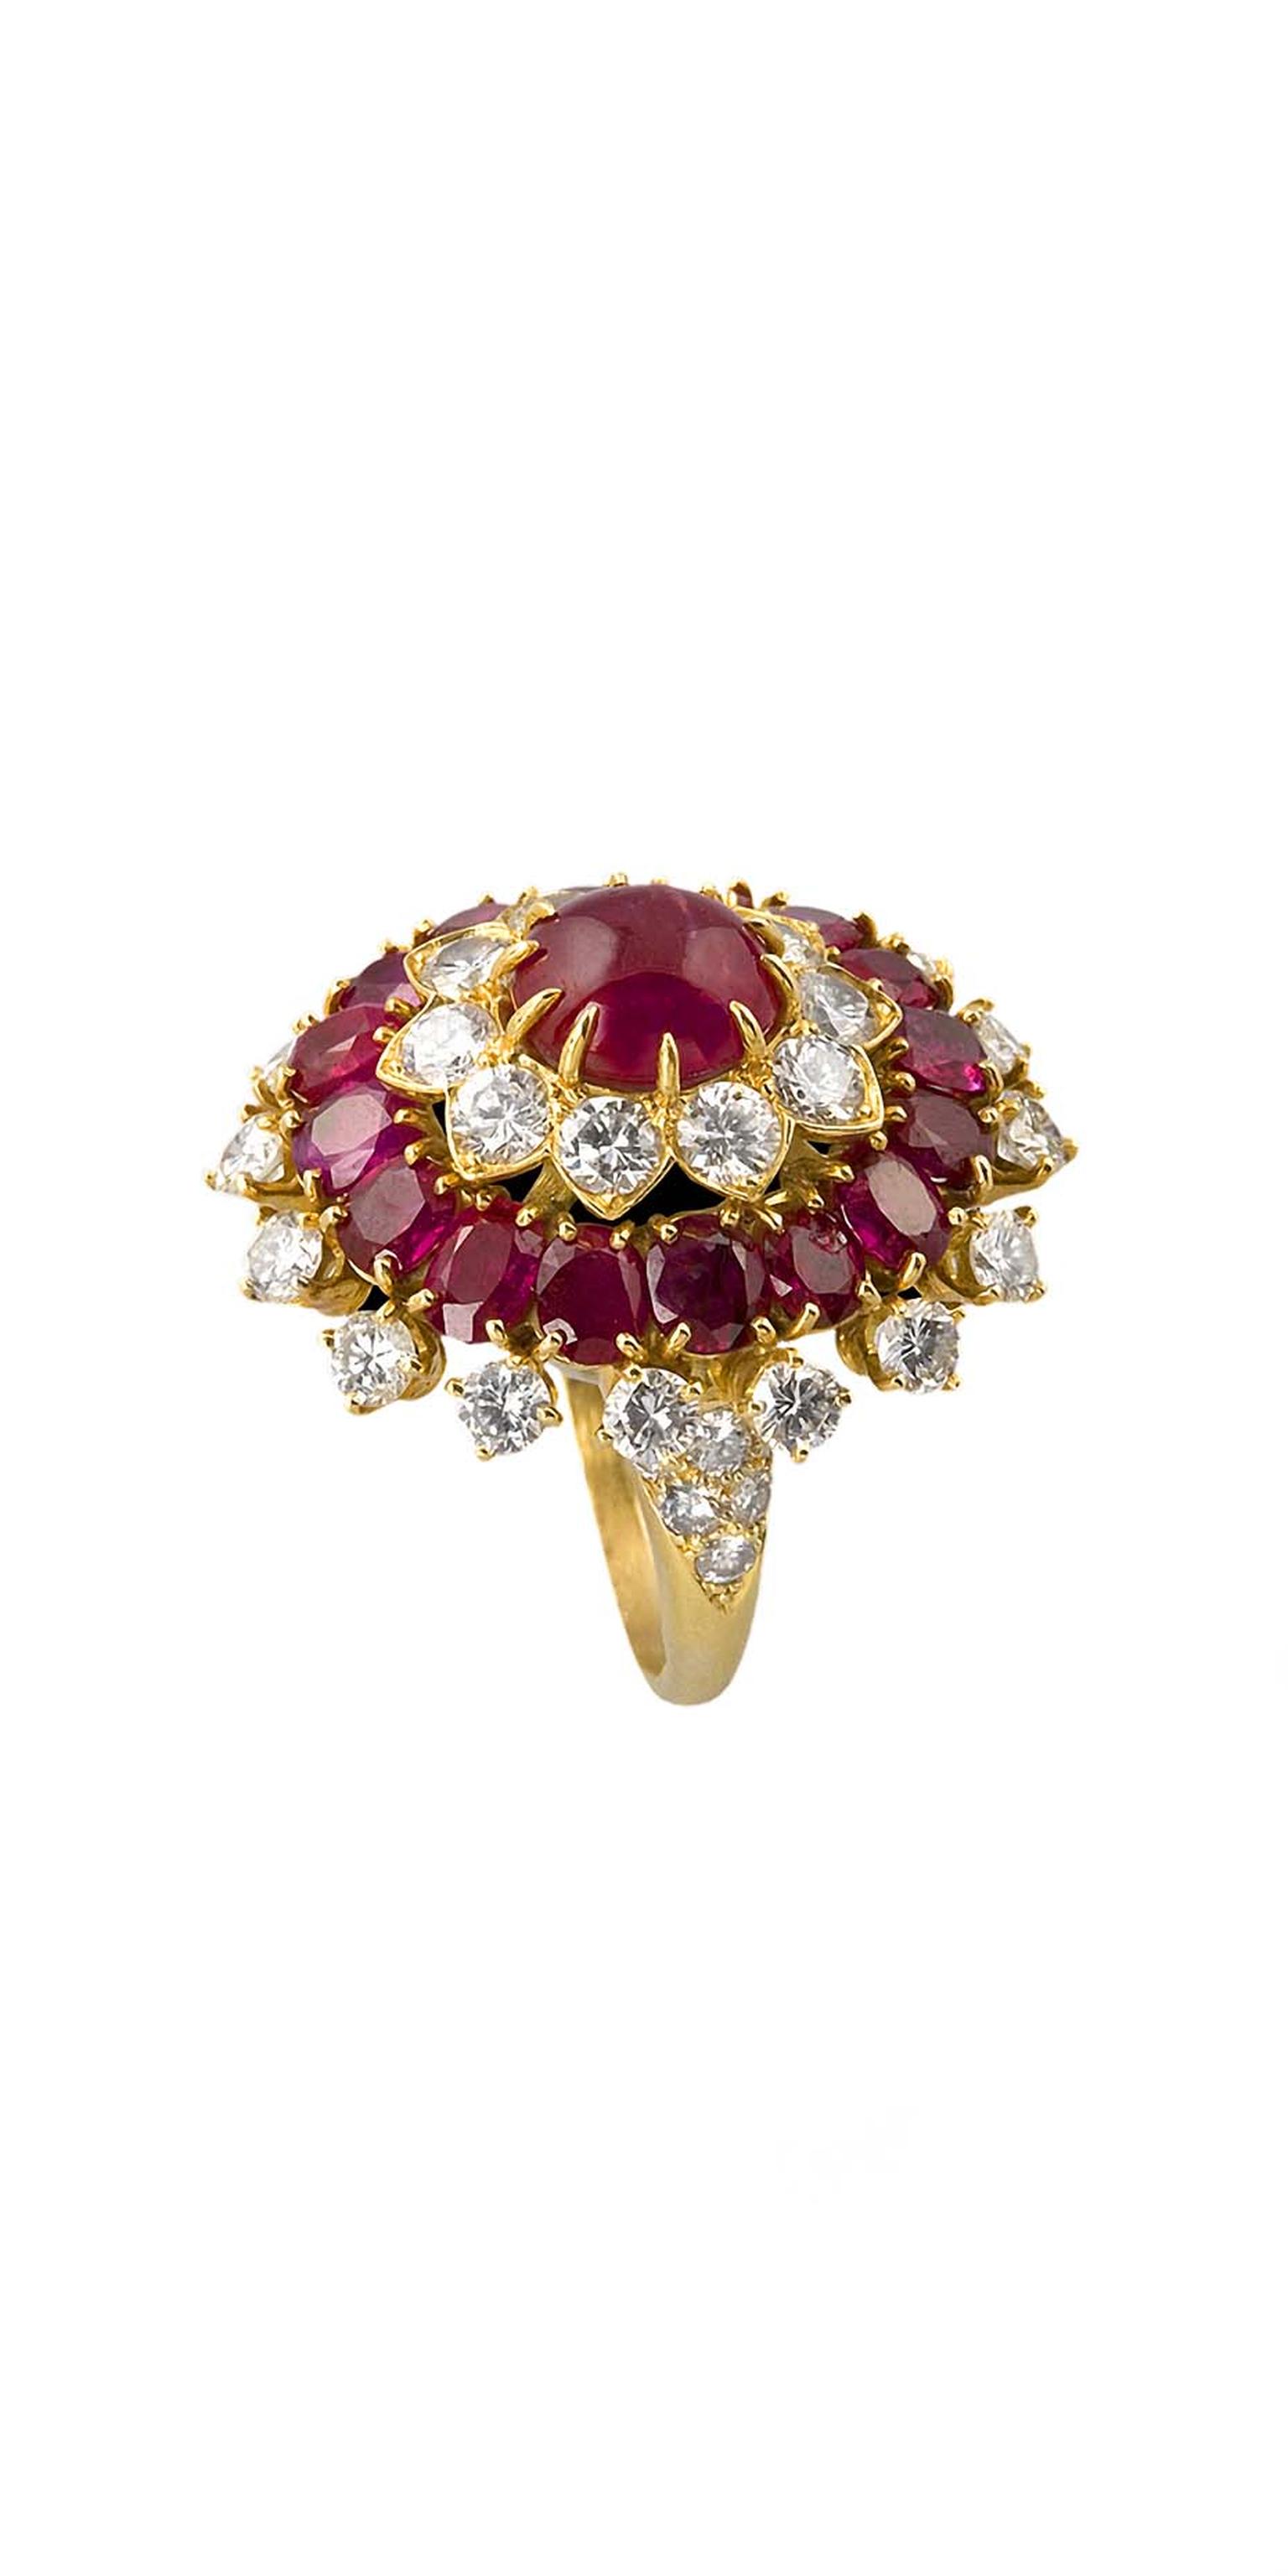 Macklowe Gallery's Indian inspired gold, ruby and diamond ring by Van Cleef & Arpels, featuring a 3.75ct center, surrounded by 38 diamonds and and 16 rubies.